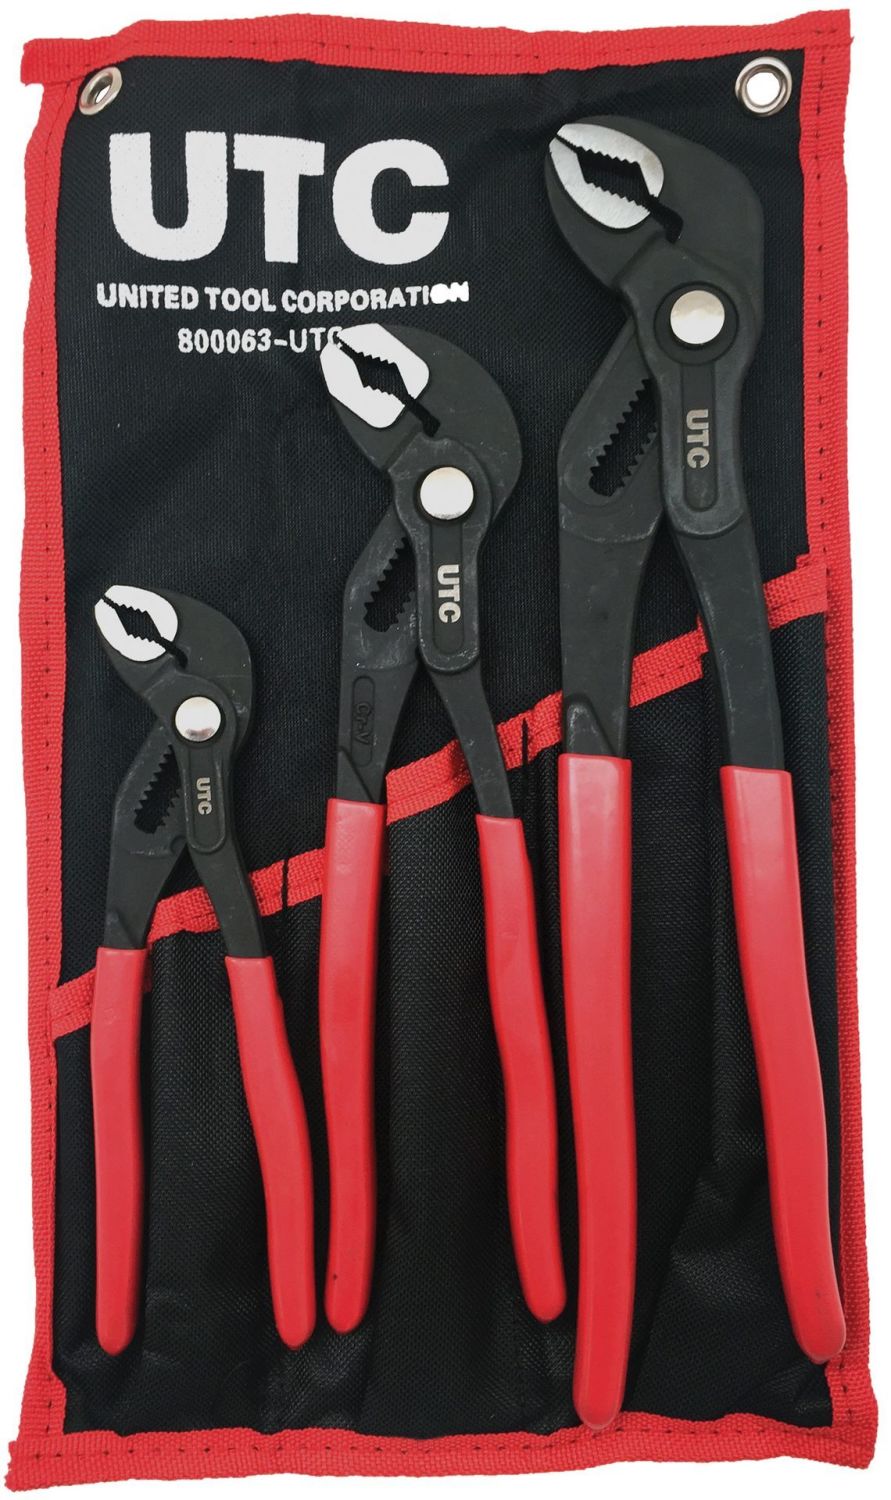 UTC 3-Piece Water Pump Pliers With Locking Function